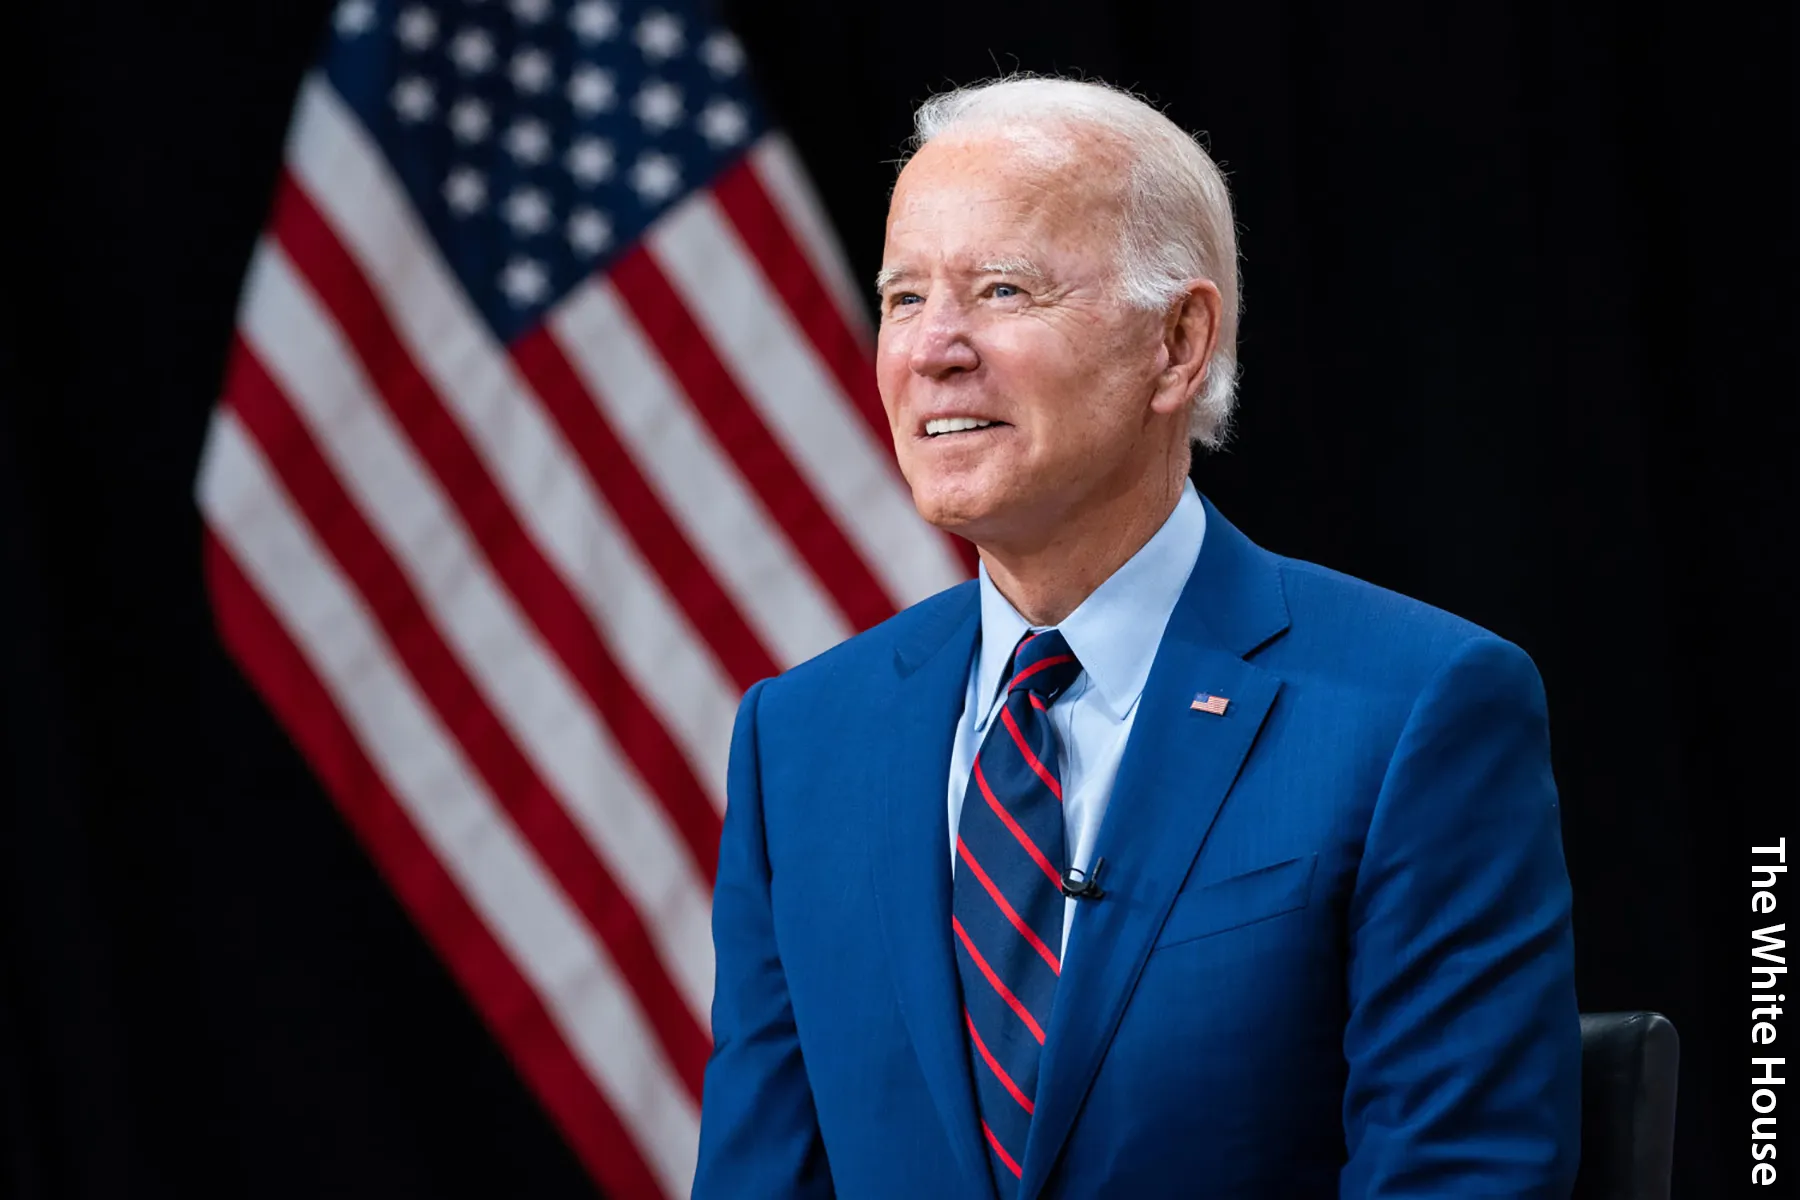 Biden’s Cancer ‘Moon Shot’ About to be Relaunched